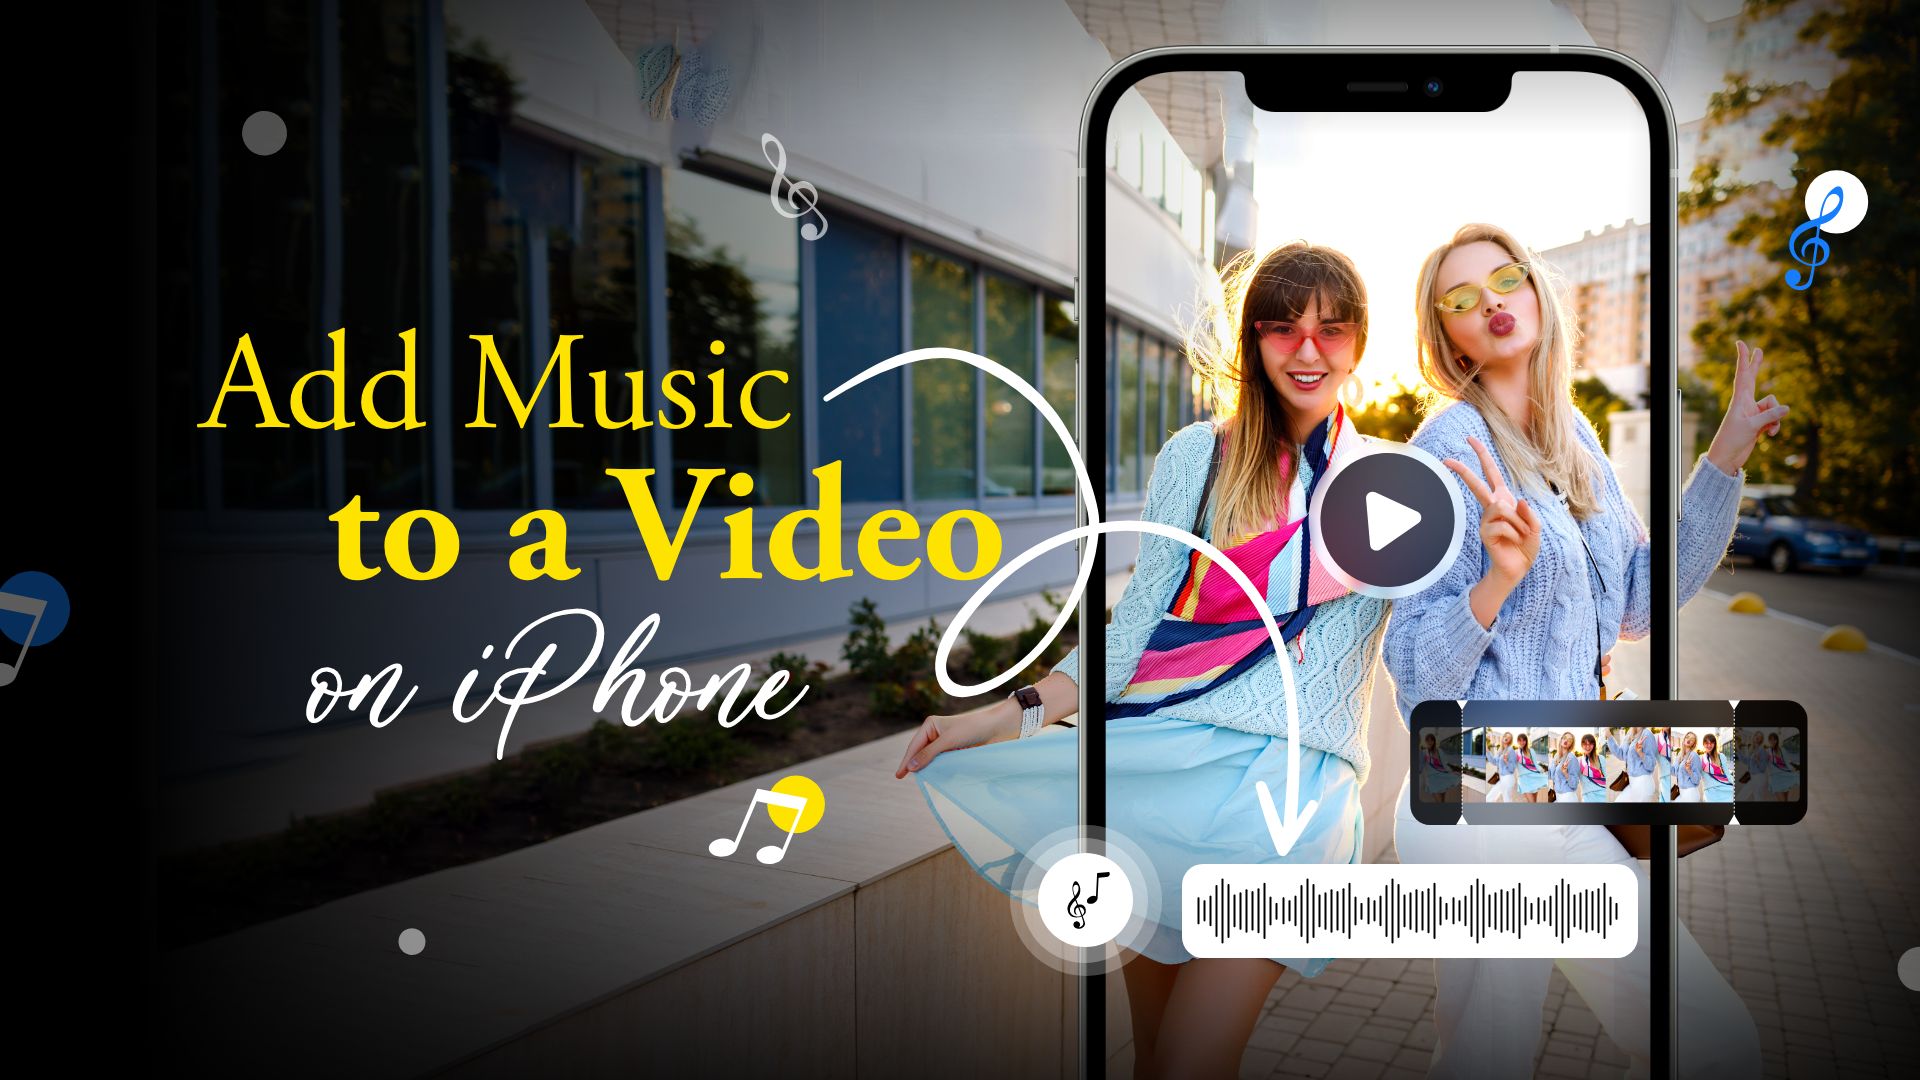 How To Add Music to a Video on iPhone